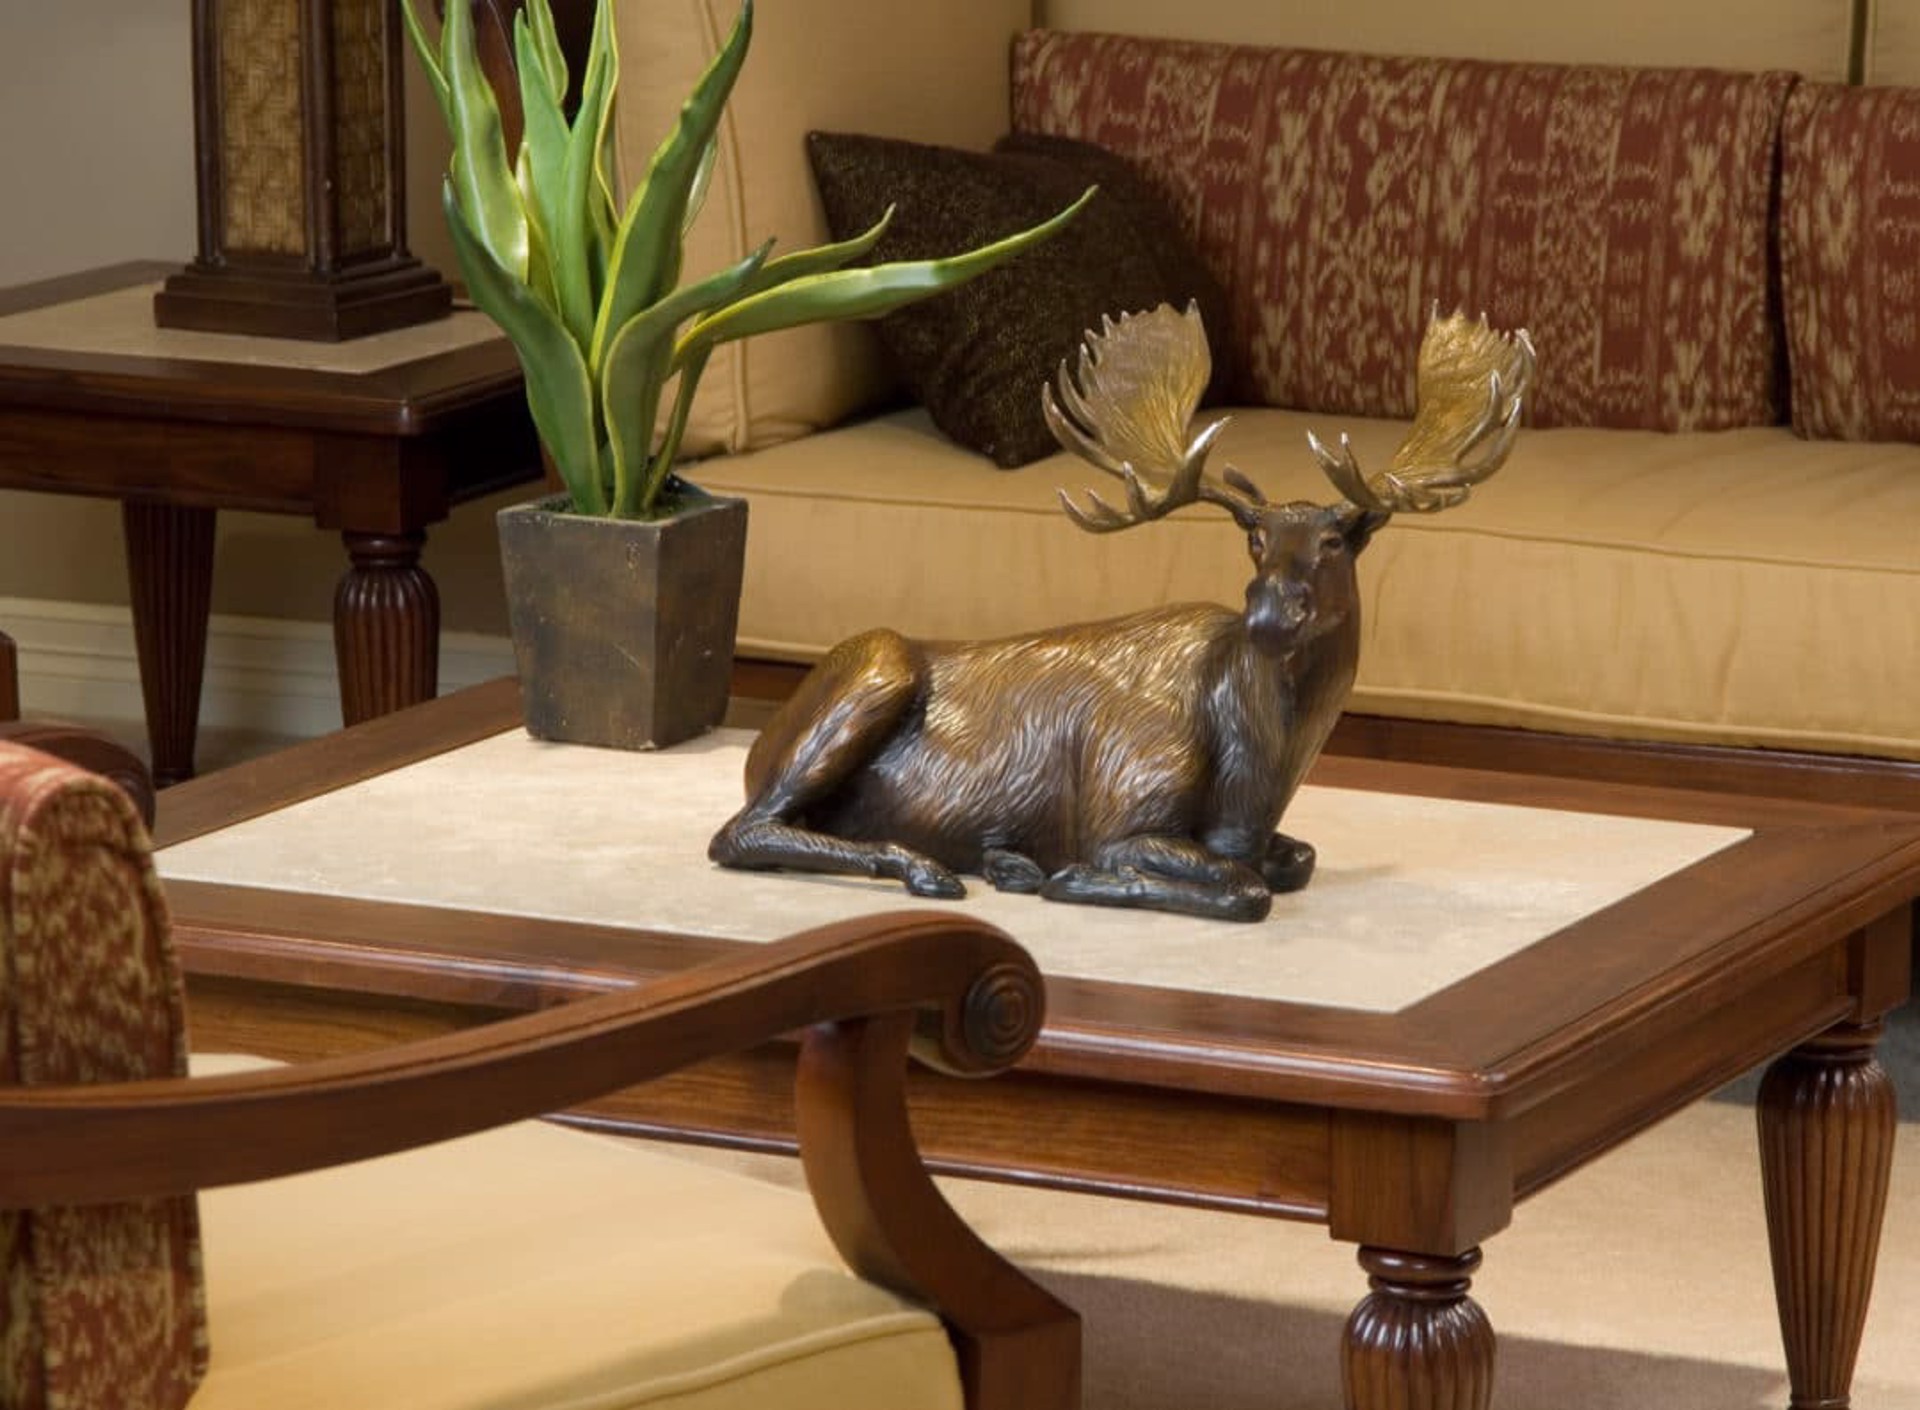 Bull Moose Laying Down Original Bronze Sculpture by Rip and Alison Caswell, Contemporary Fine Art, Modern Wildlife Art, Available At Gallery Wild